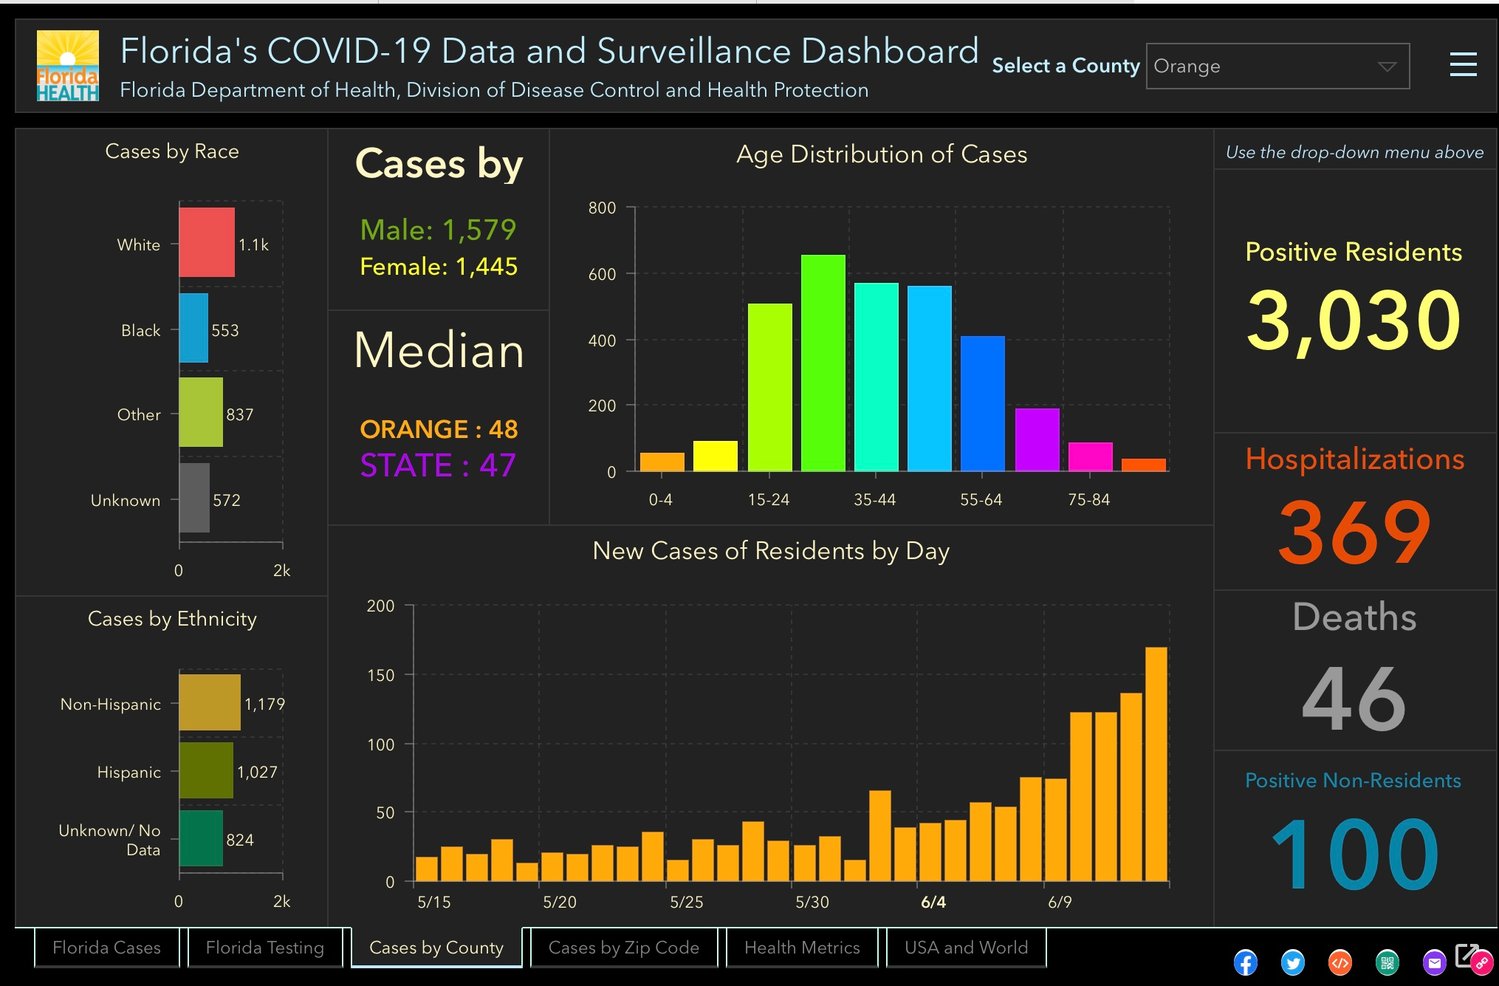 Florida Department of Health COVID-19 Dashboard, Orange County statistics as reported June 14, 2020.